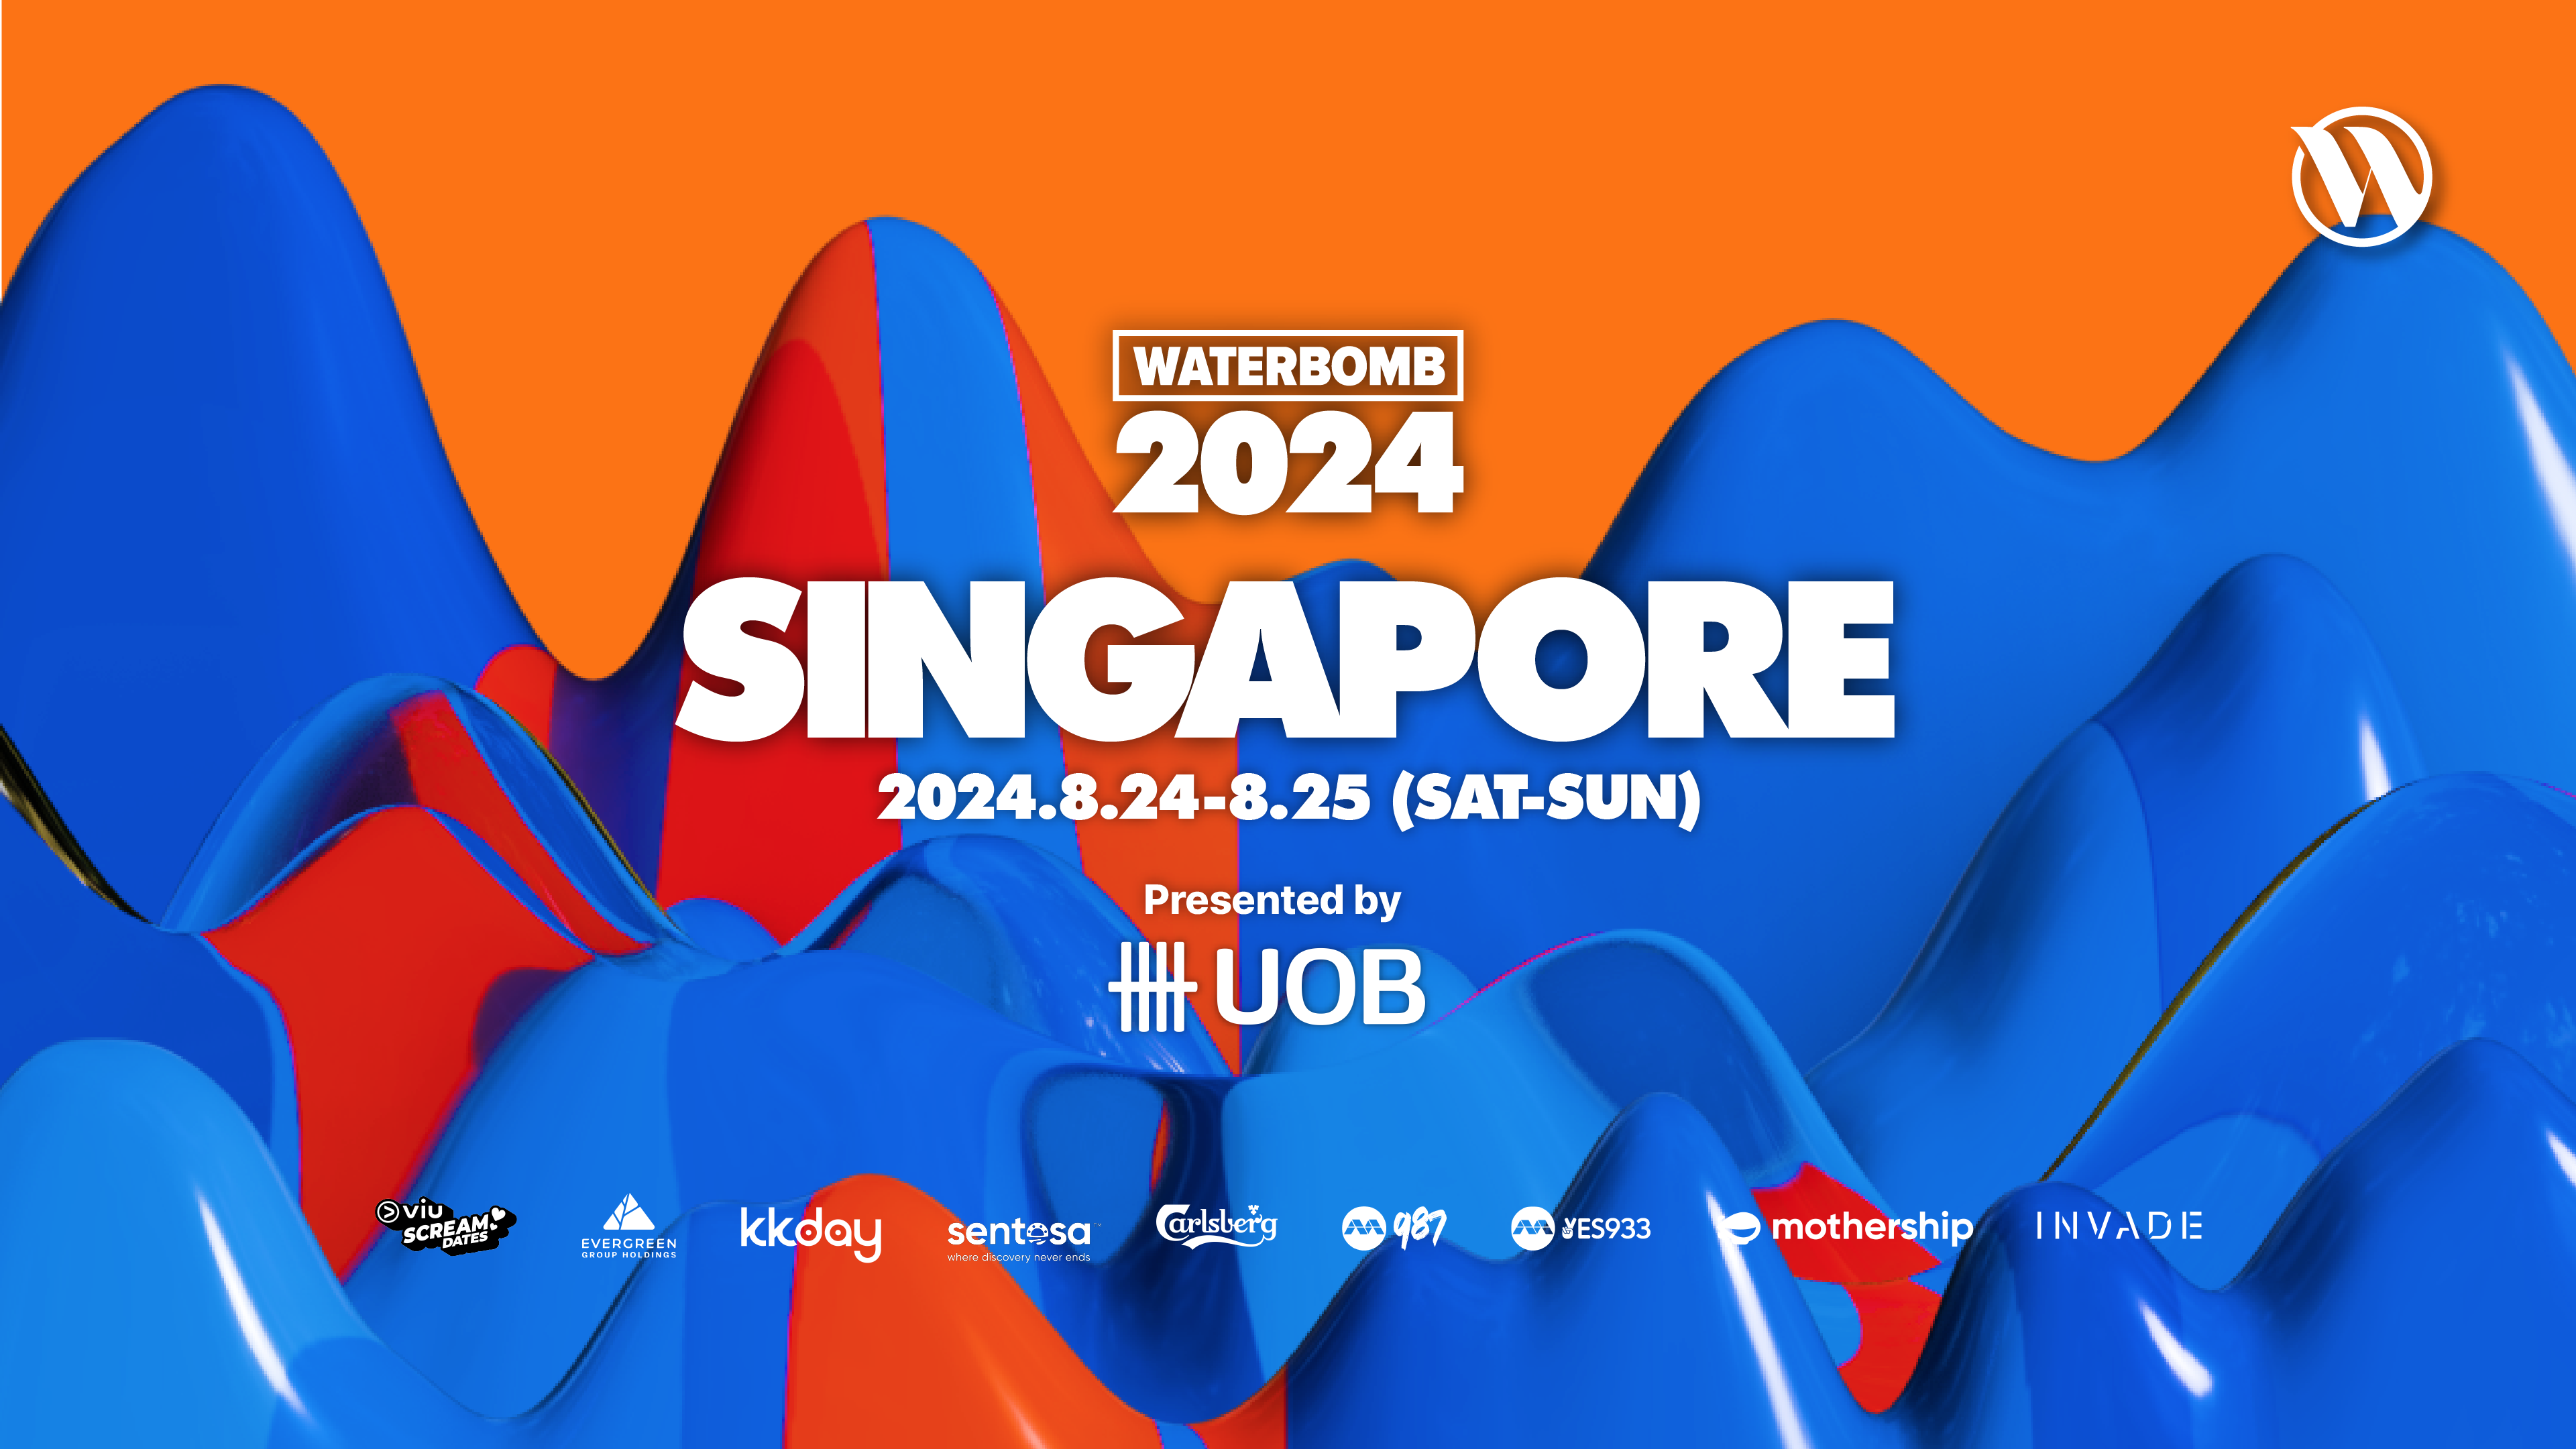 WATERBOMB is coming to Singapore in Aug'24!